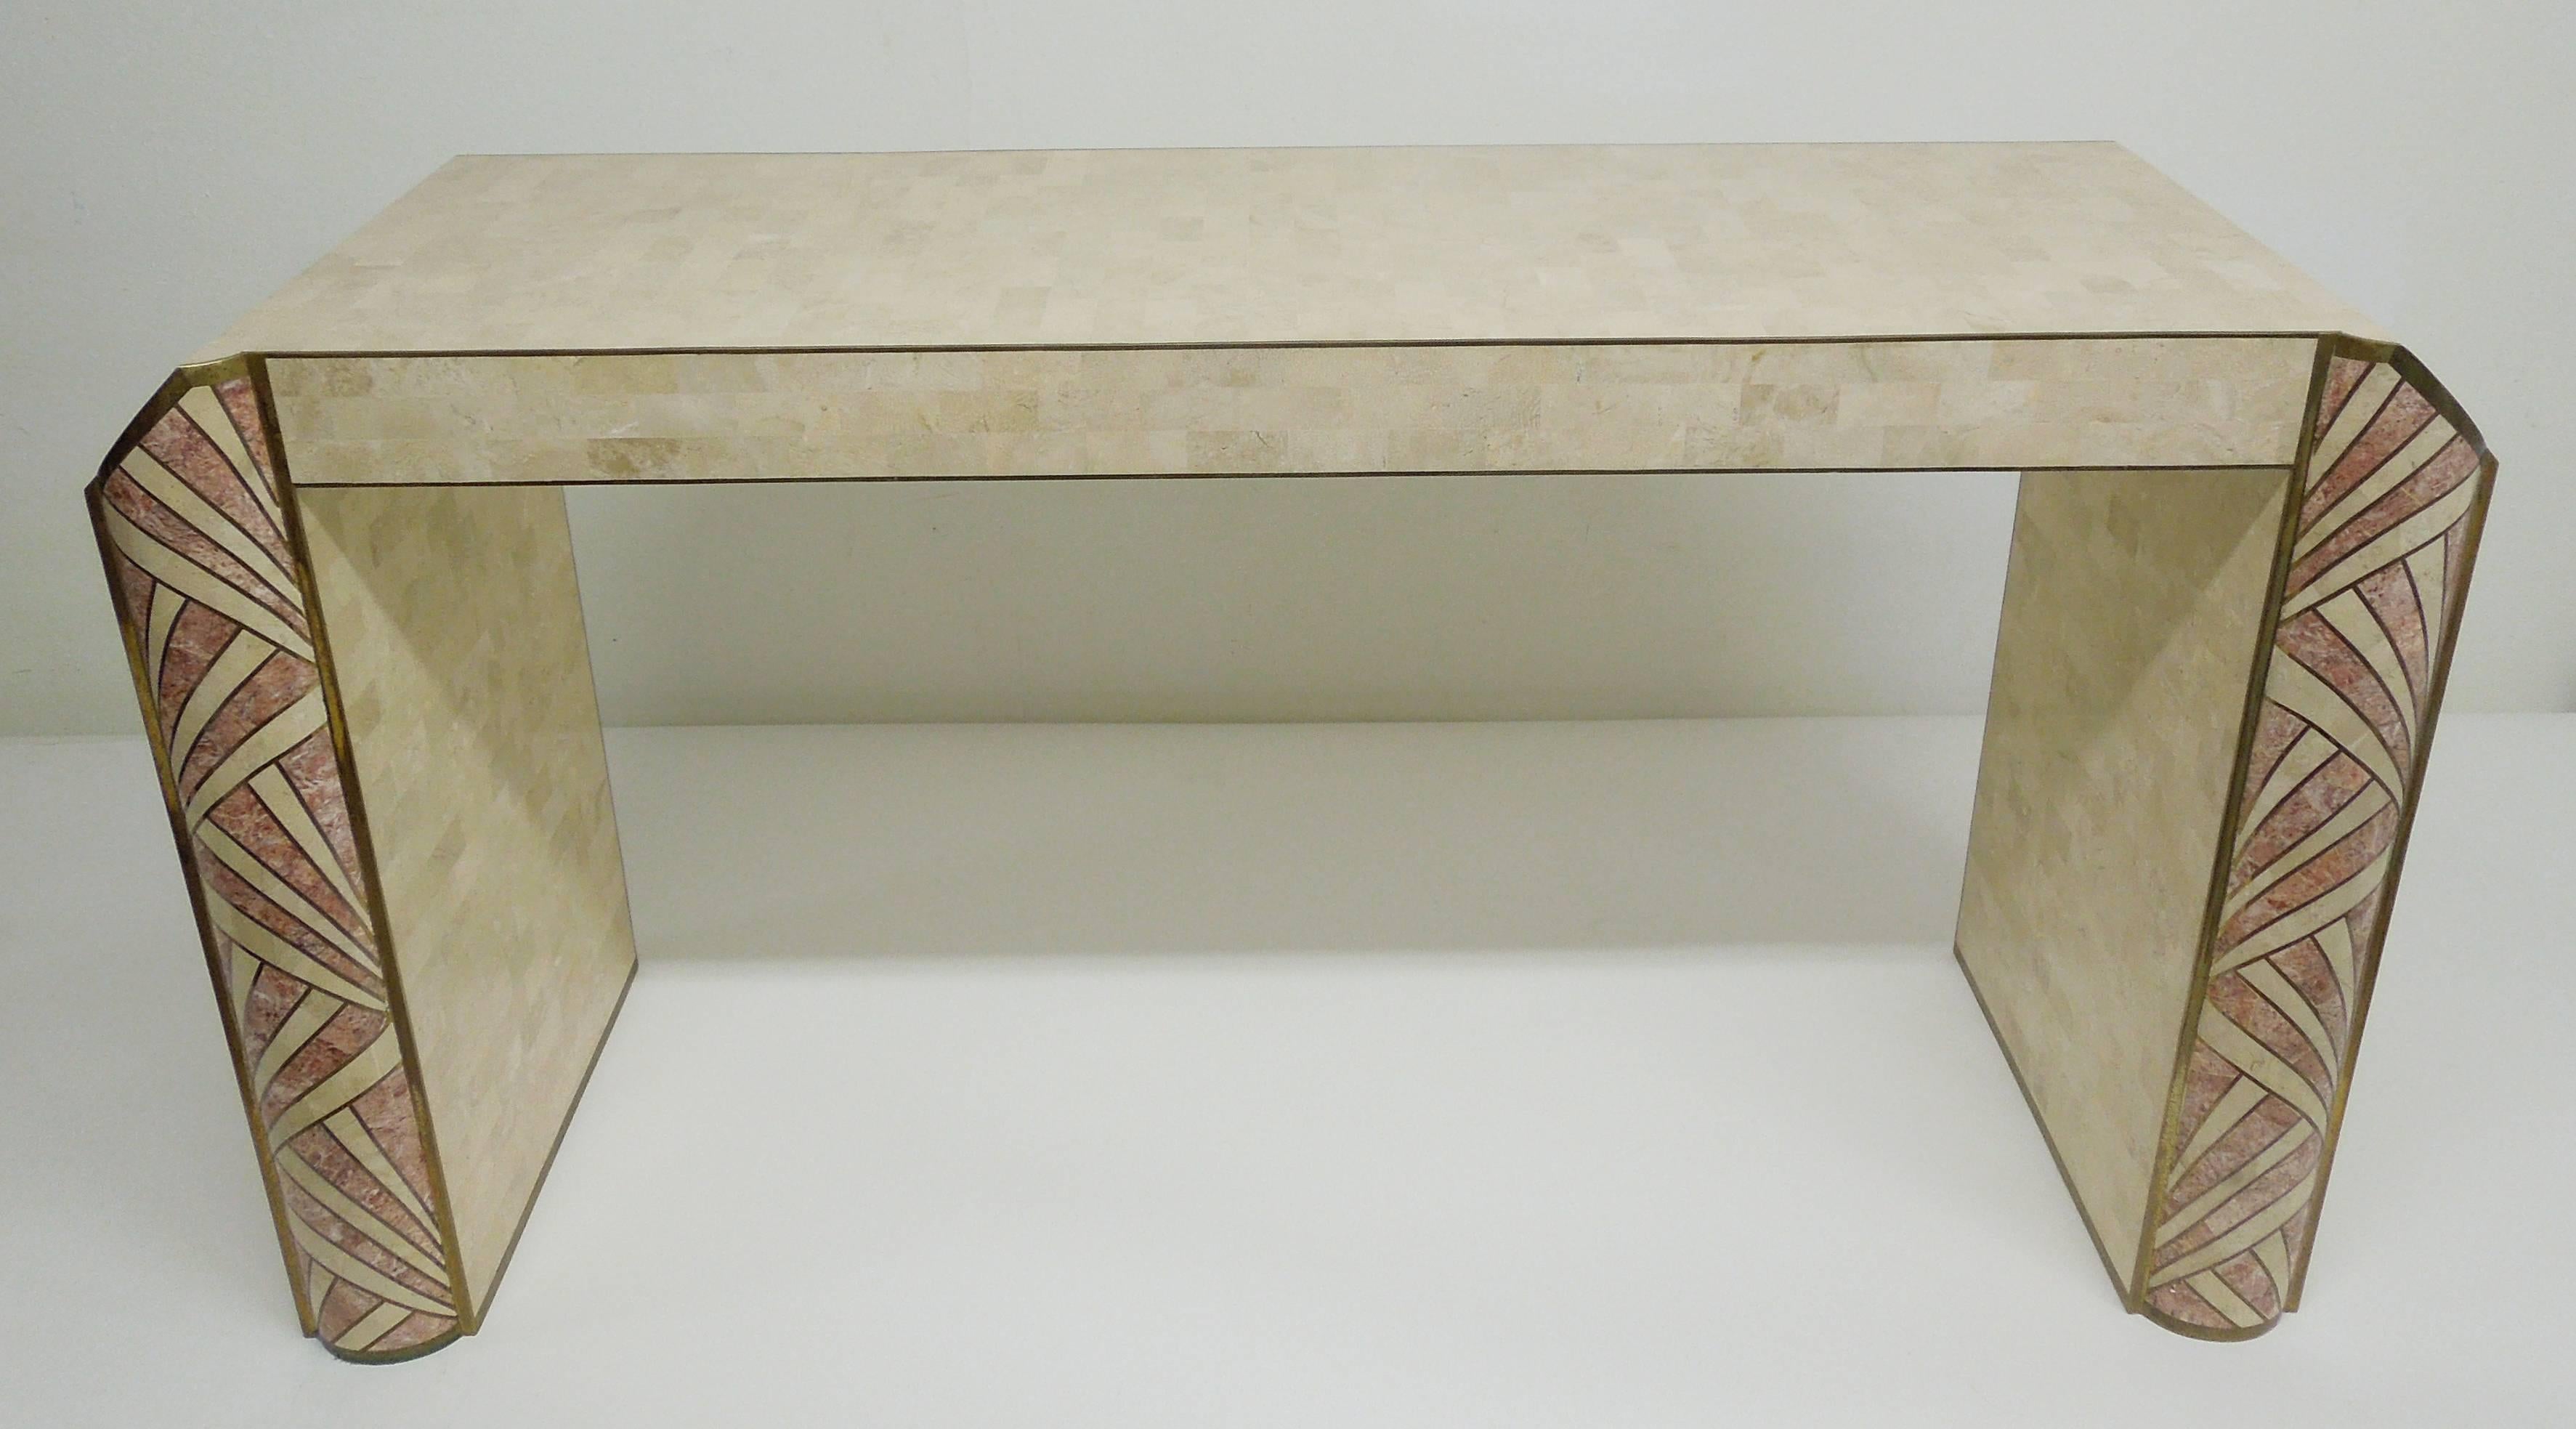 Brass Art Deco Console Table Inlaid Stone by Maitland-Smith